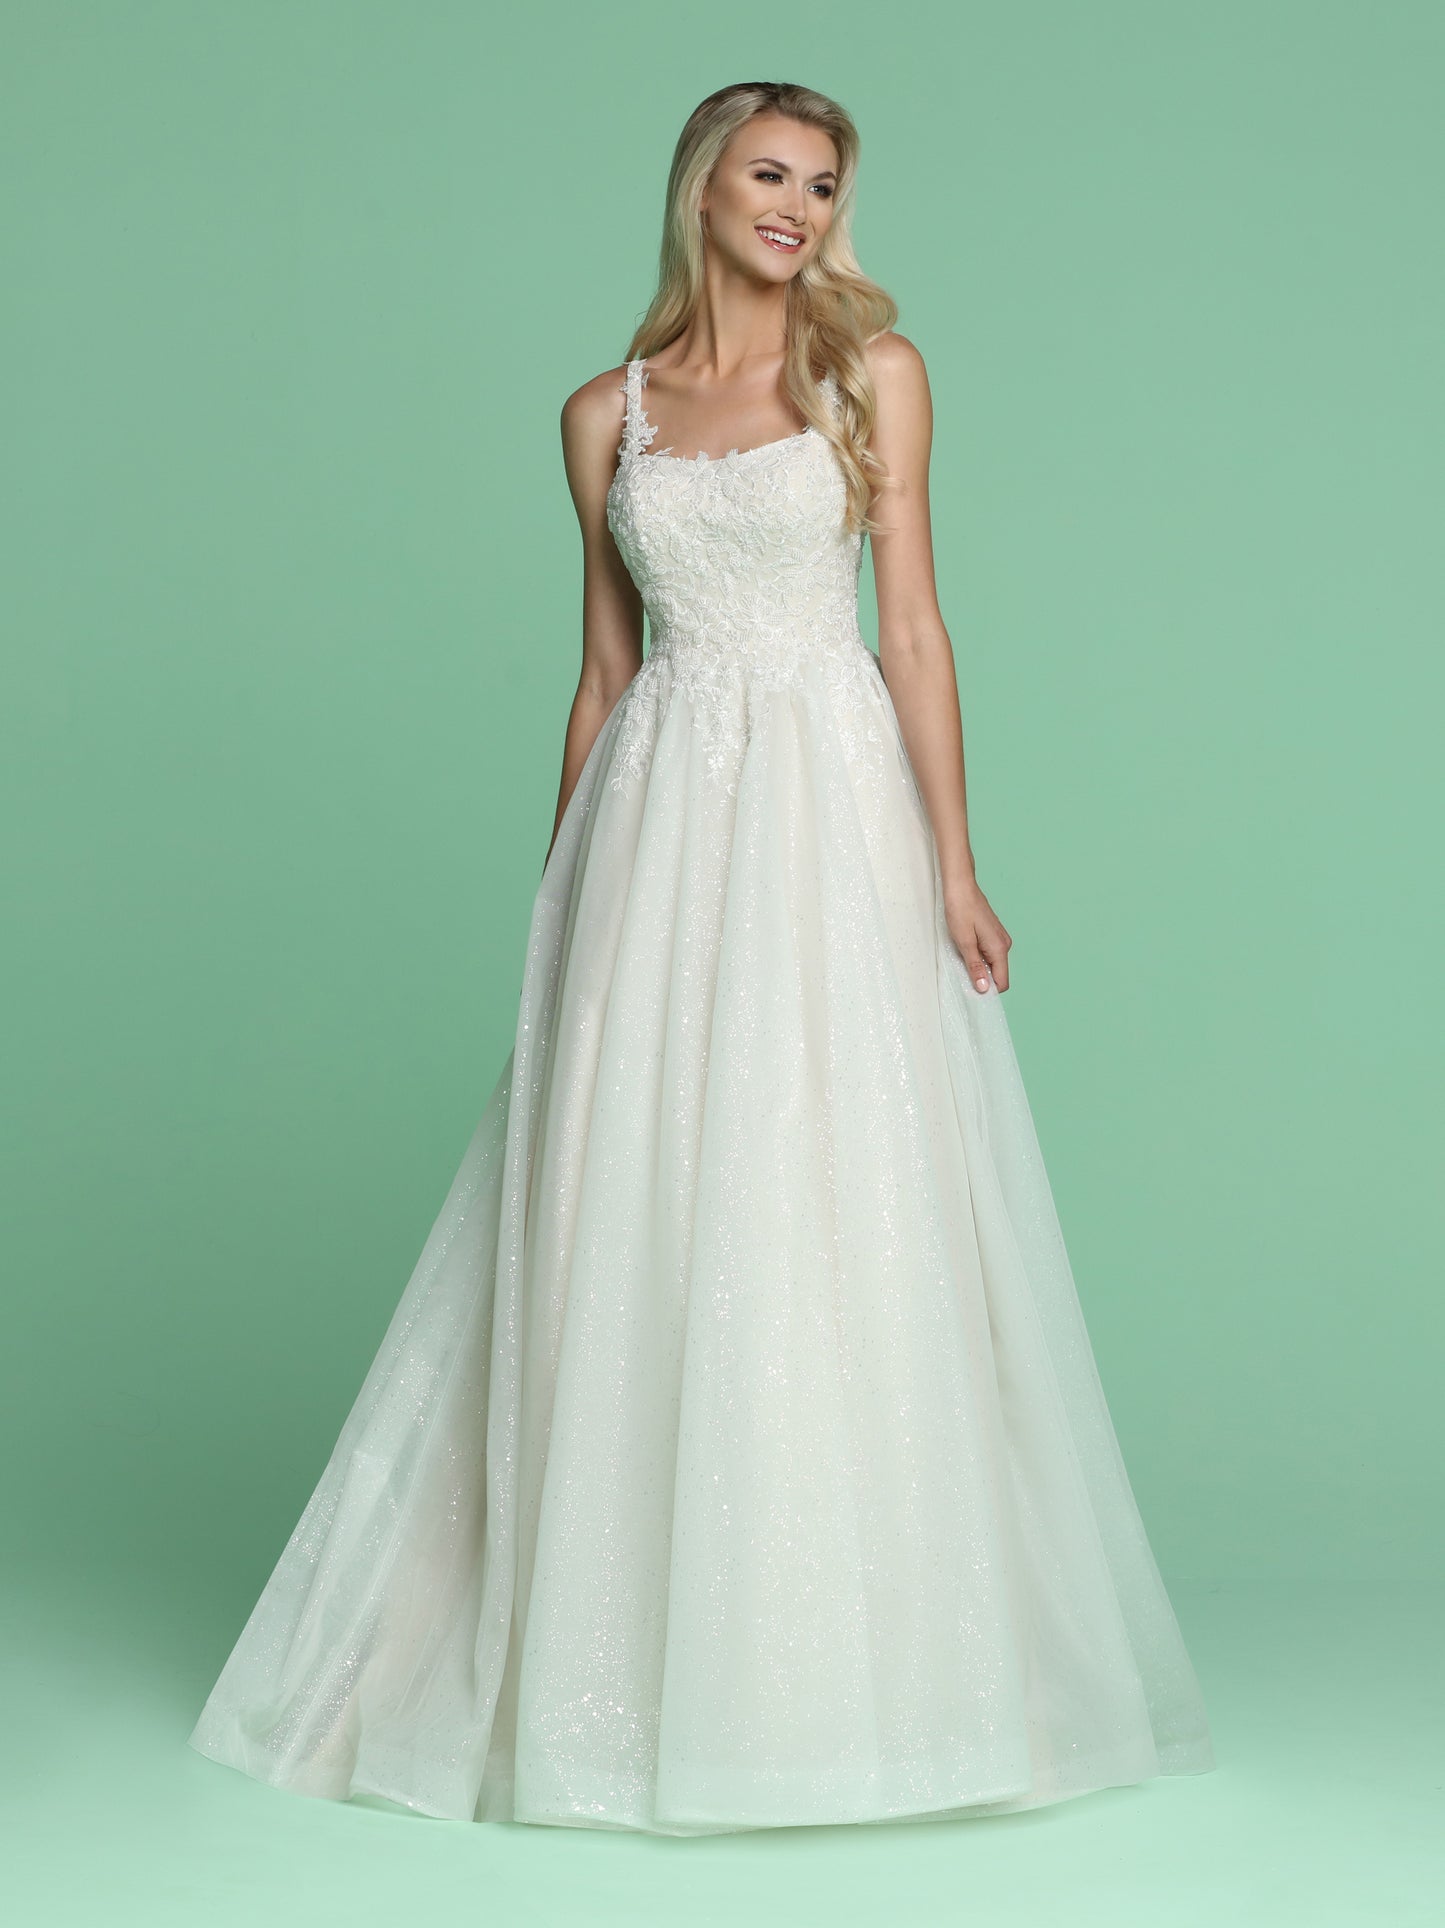 Davinci Bridal 50628 is a Beautiful Long Shimmering wedding dress. Featuring a Fitted bodice with embroidered lace cascading into a stunning Glitter shimmer tulle A line ball gown skirt with pockets and a lush train. Straps with embroidered lace cascading over. Available for 1-2 Week Delivery!!!  Available Sizes: 2,4,6,8,10,12,14,16,18,20  Available Colors: Ivory/Blush, Ivory/Ivory